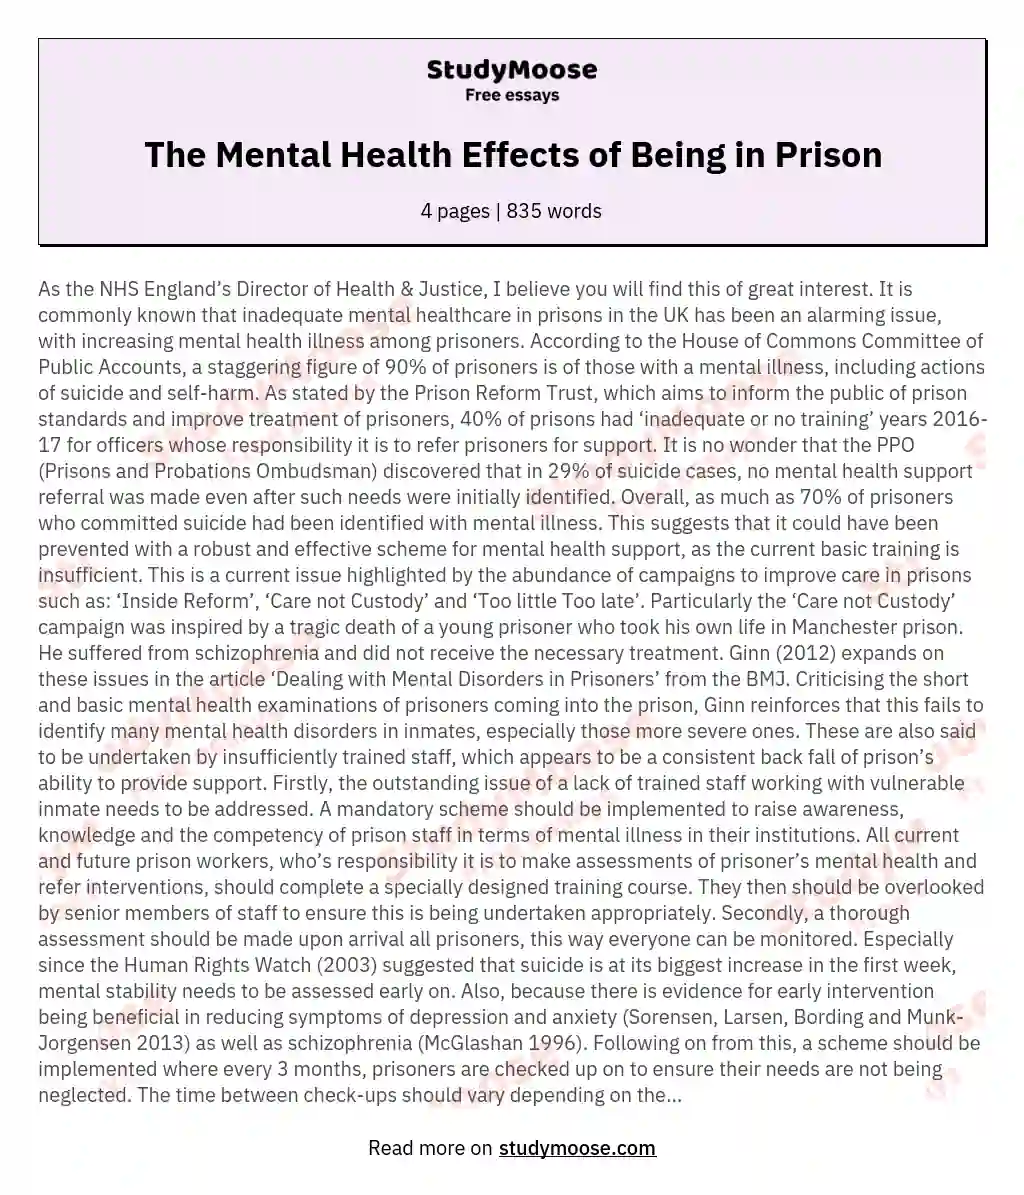 The Mental Health Effects of Being in Prison essay